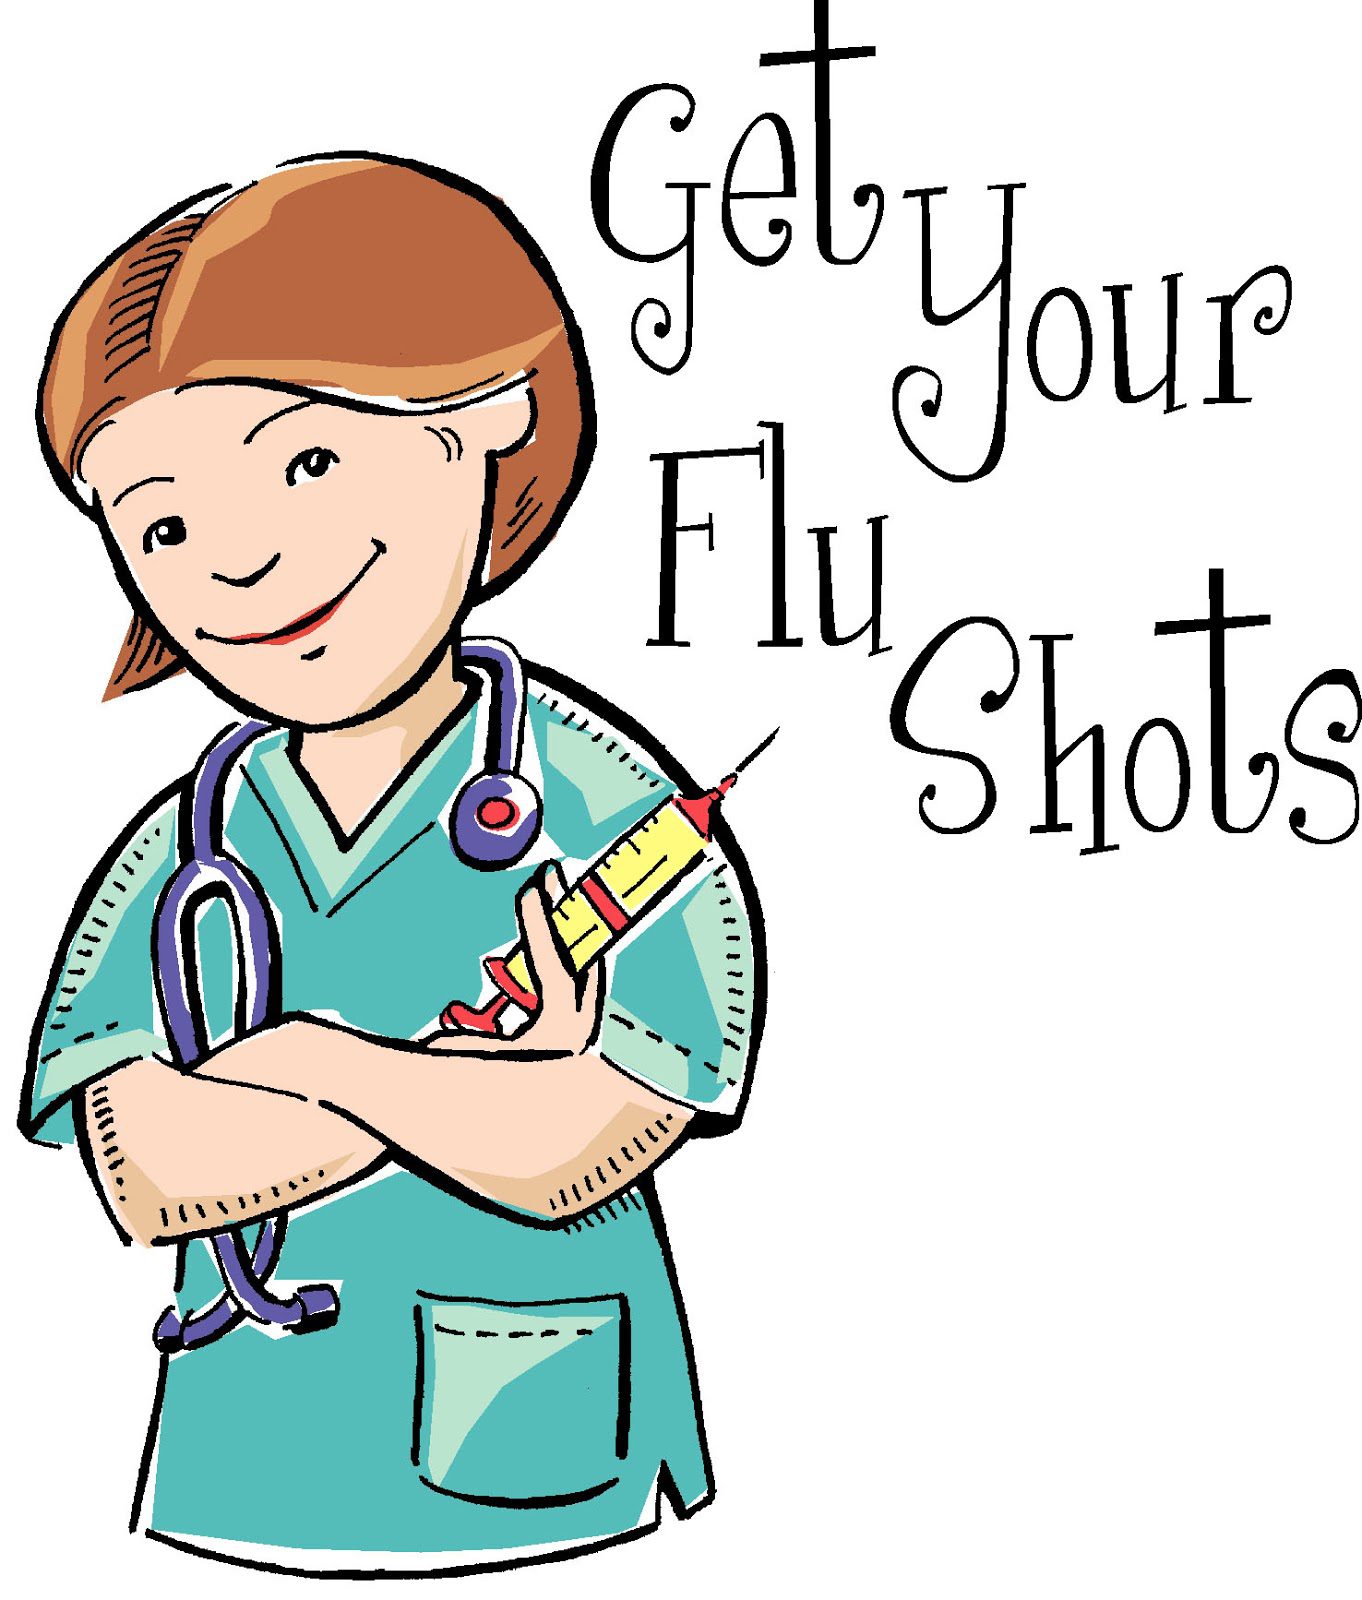 Top Ten Flu Tips for Cancer Patients - GIST Support - The Life Raft Group